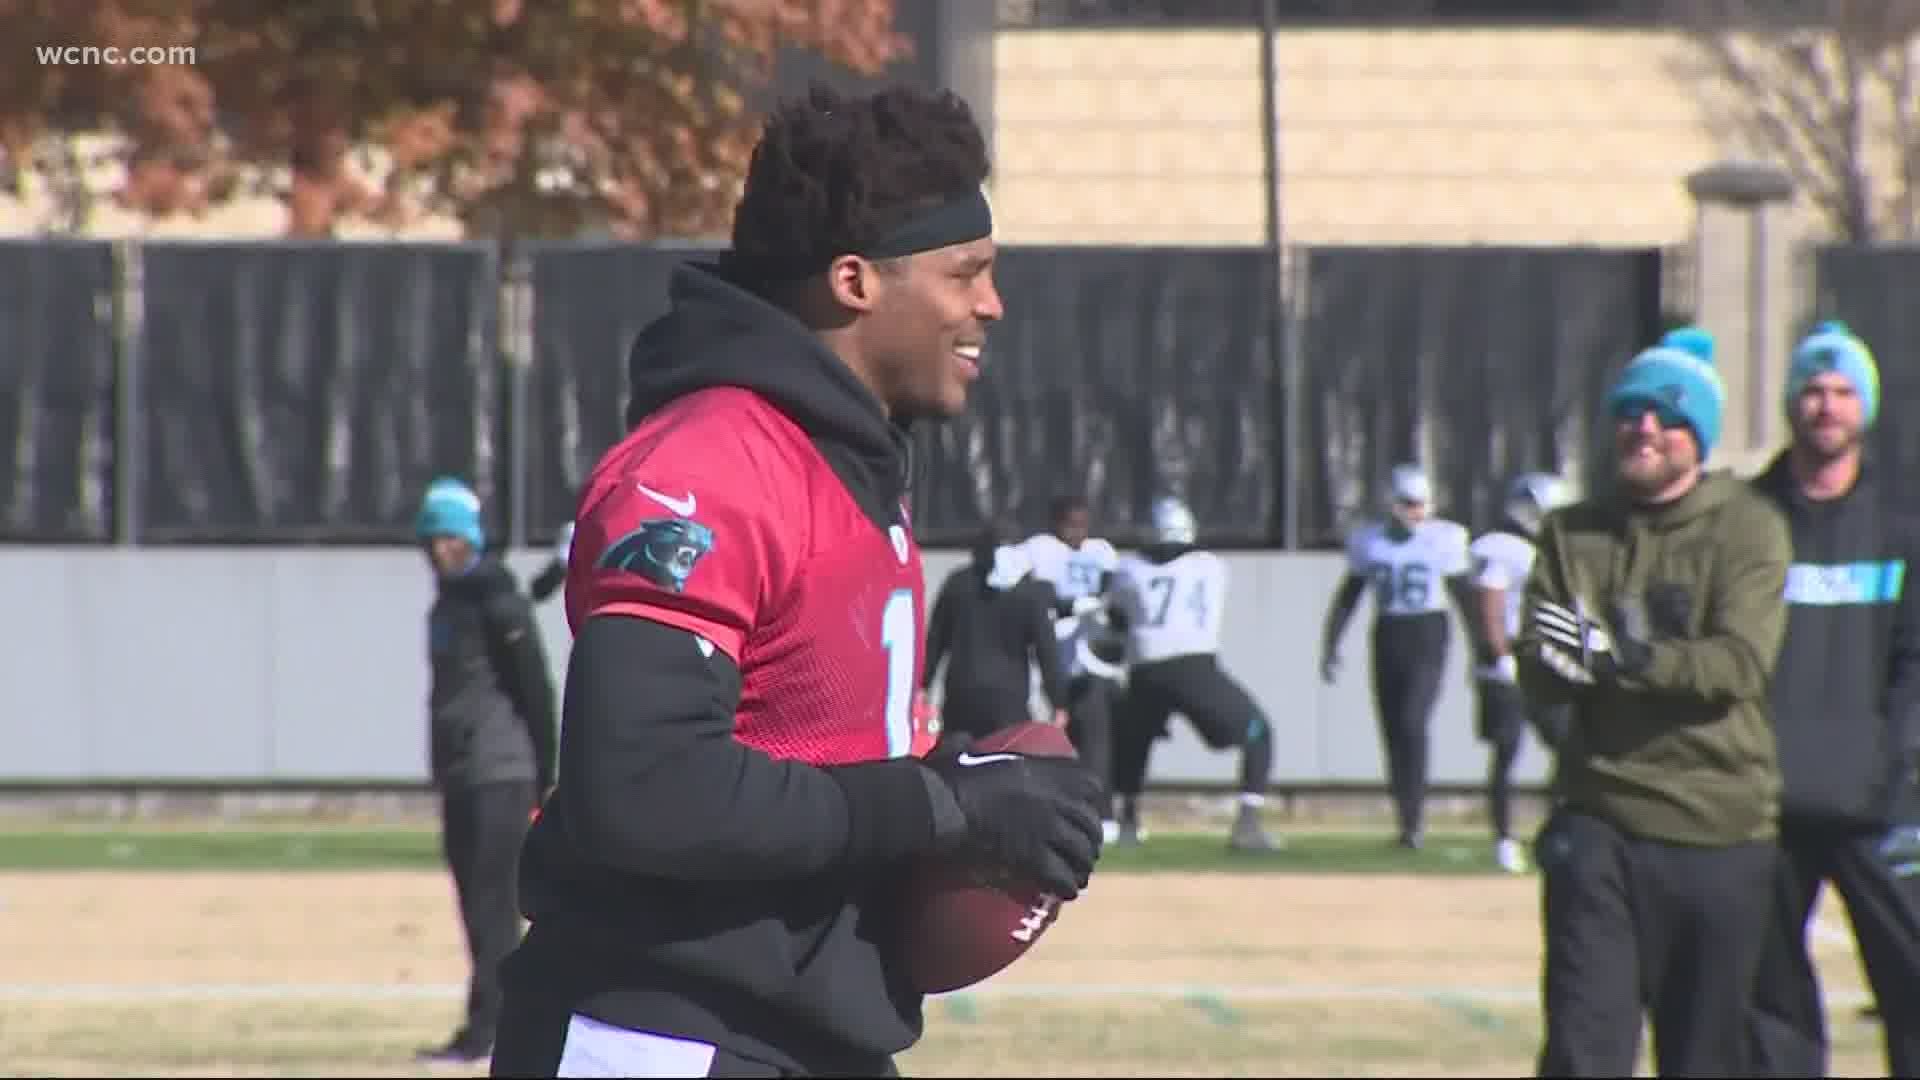 ESPN: Cam Newton reaches agreement with New England Patriots